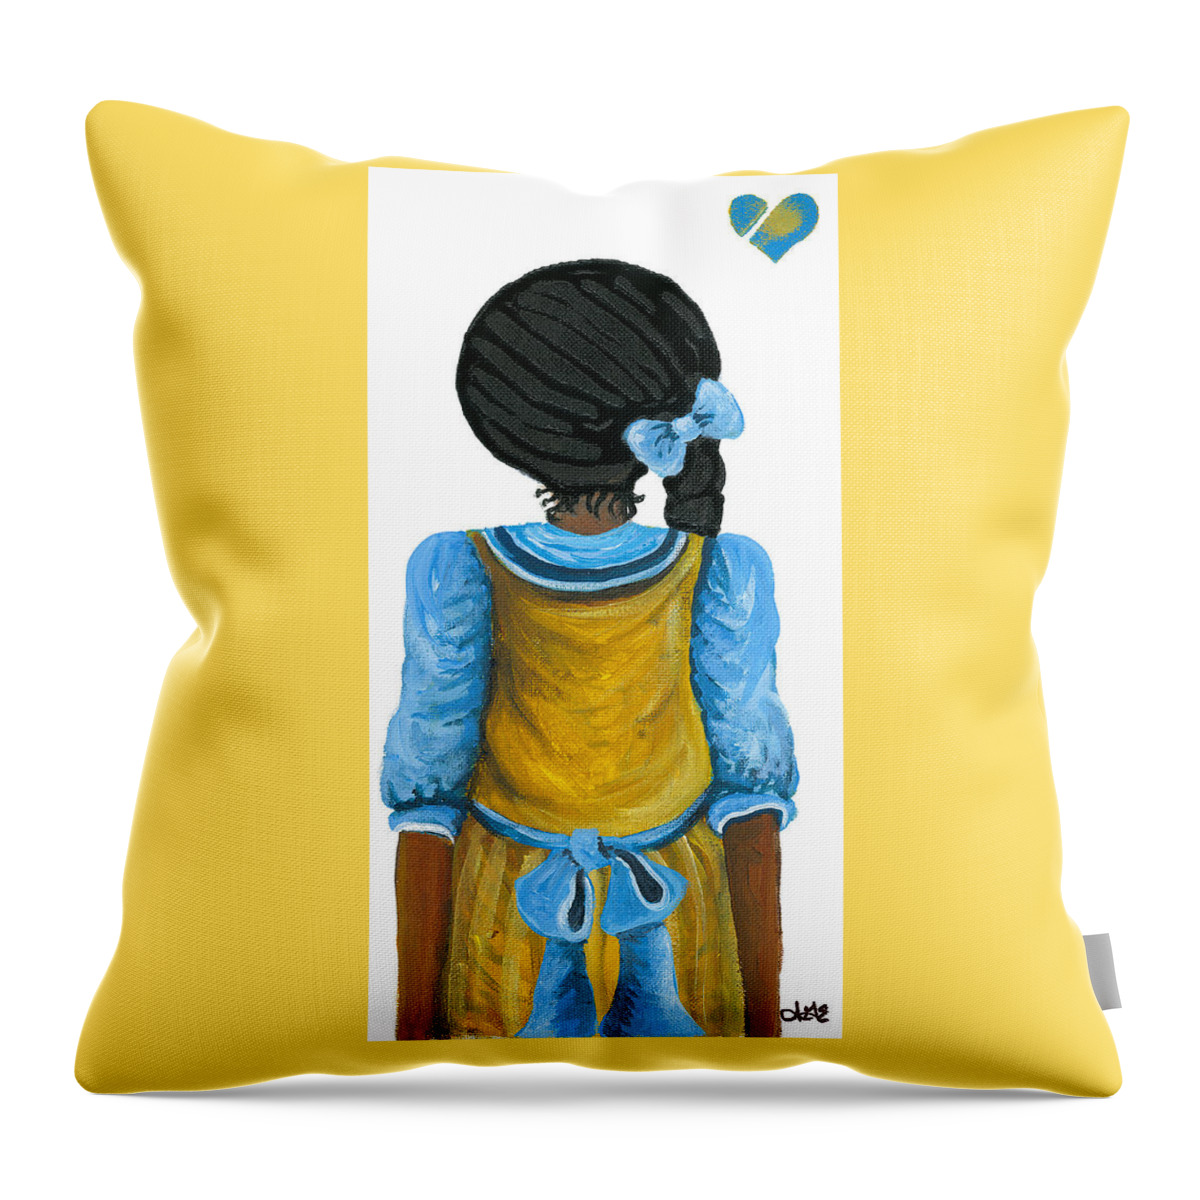  Throw Pillow featuring the painting Jeanie by Sonja Griffin Evans